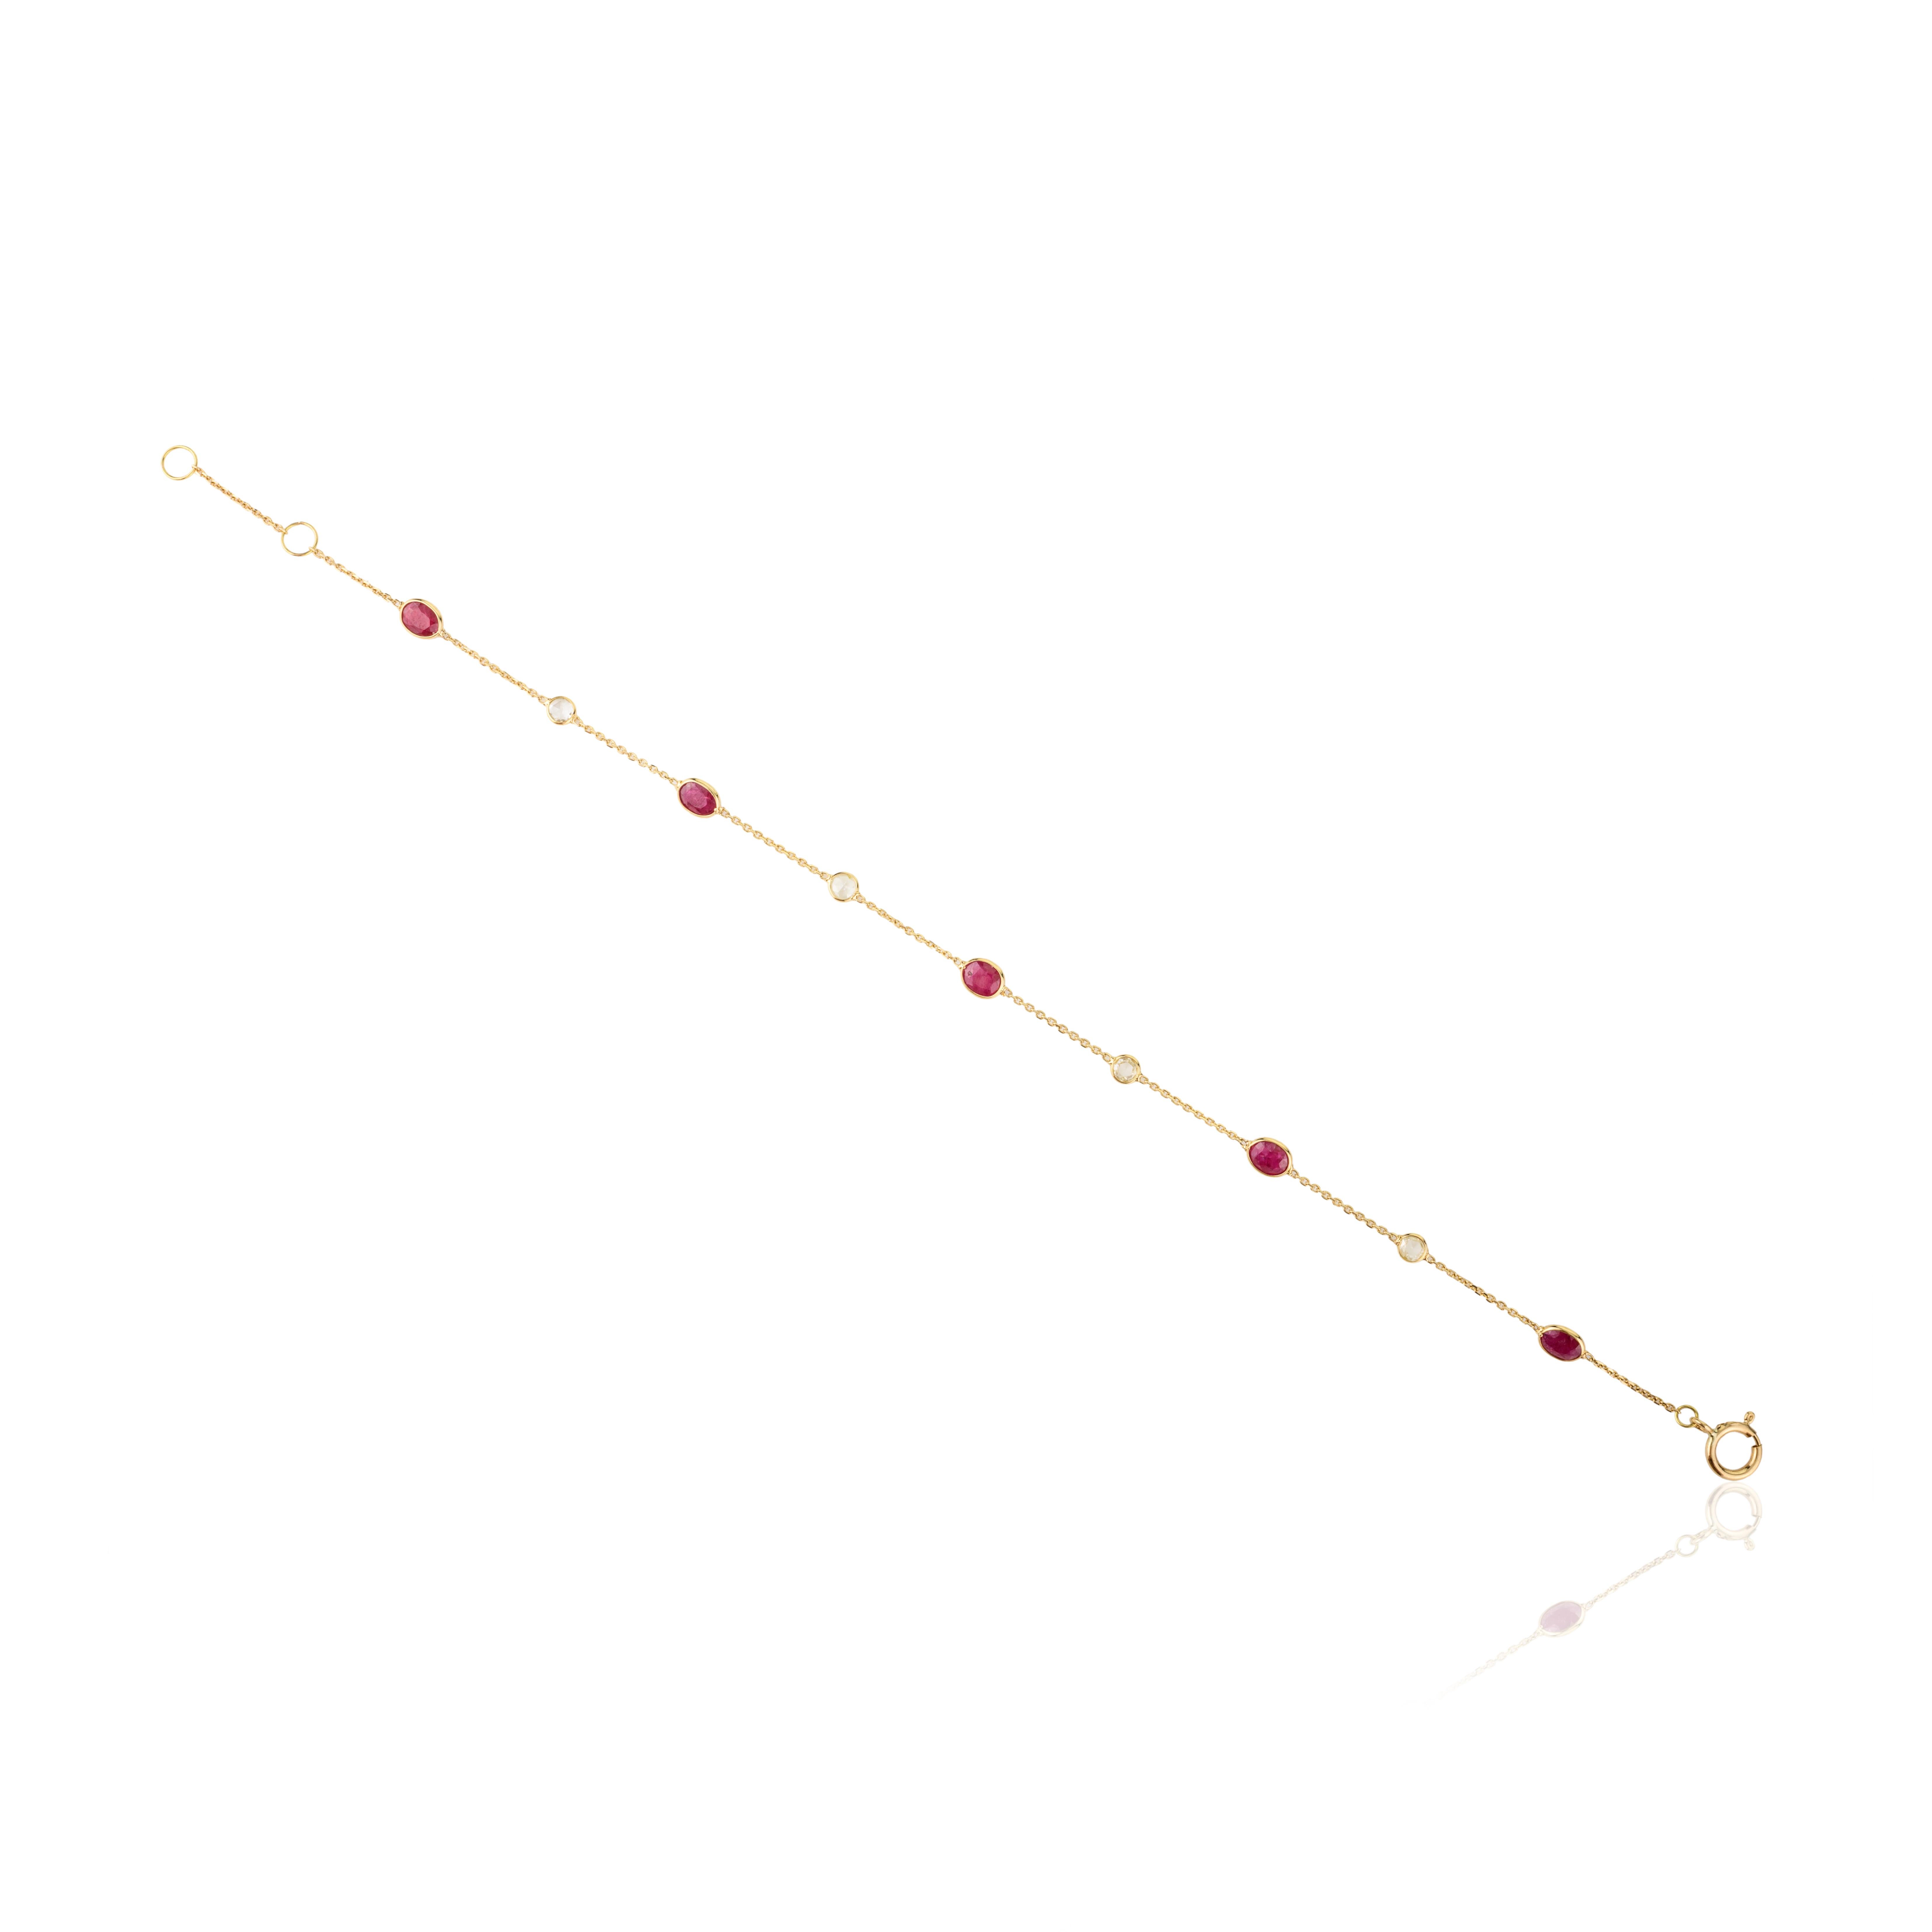 Modern Minimal Natural Ruby Diamond Chain Bracelet in 18k Solid Yellow Gold For Sale